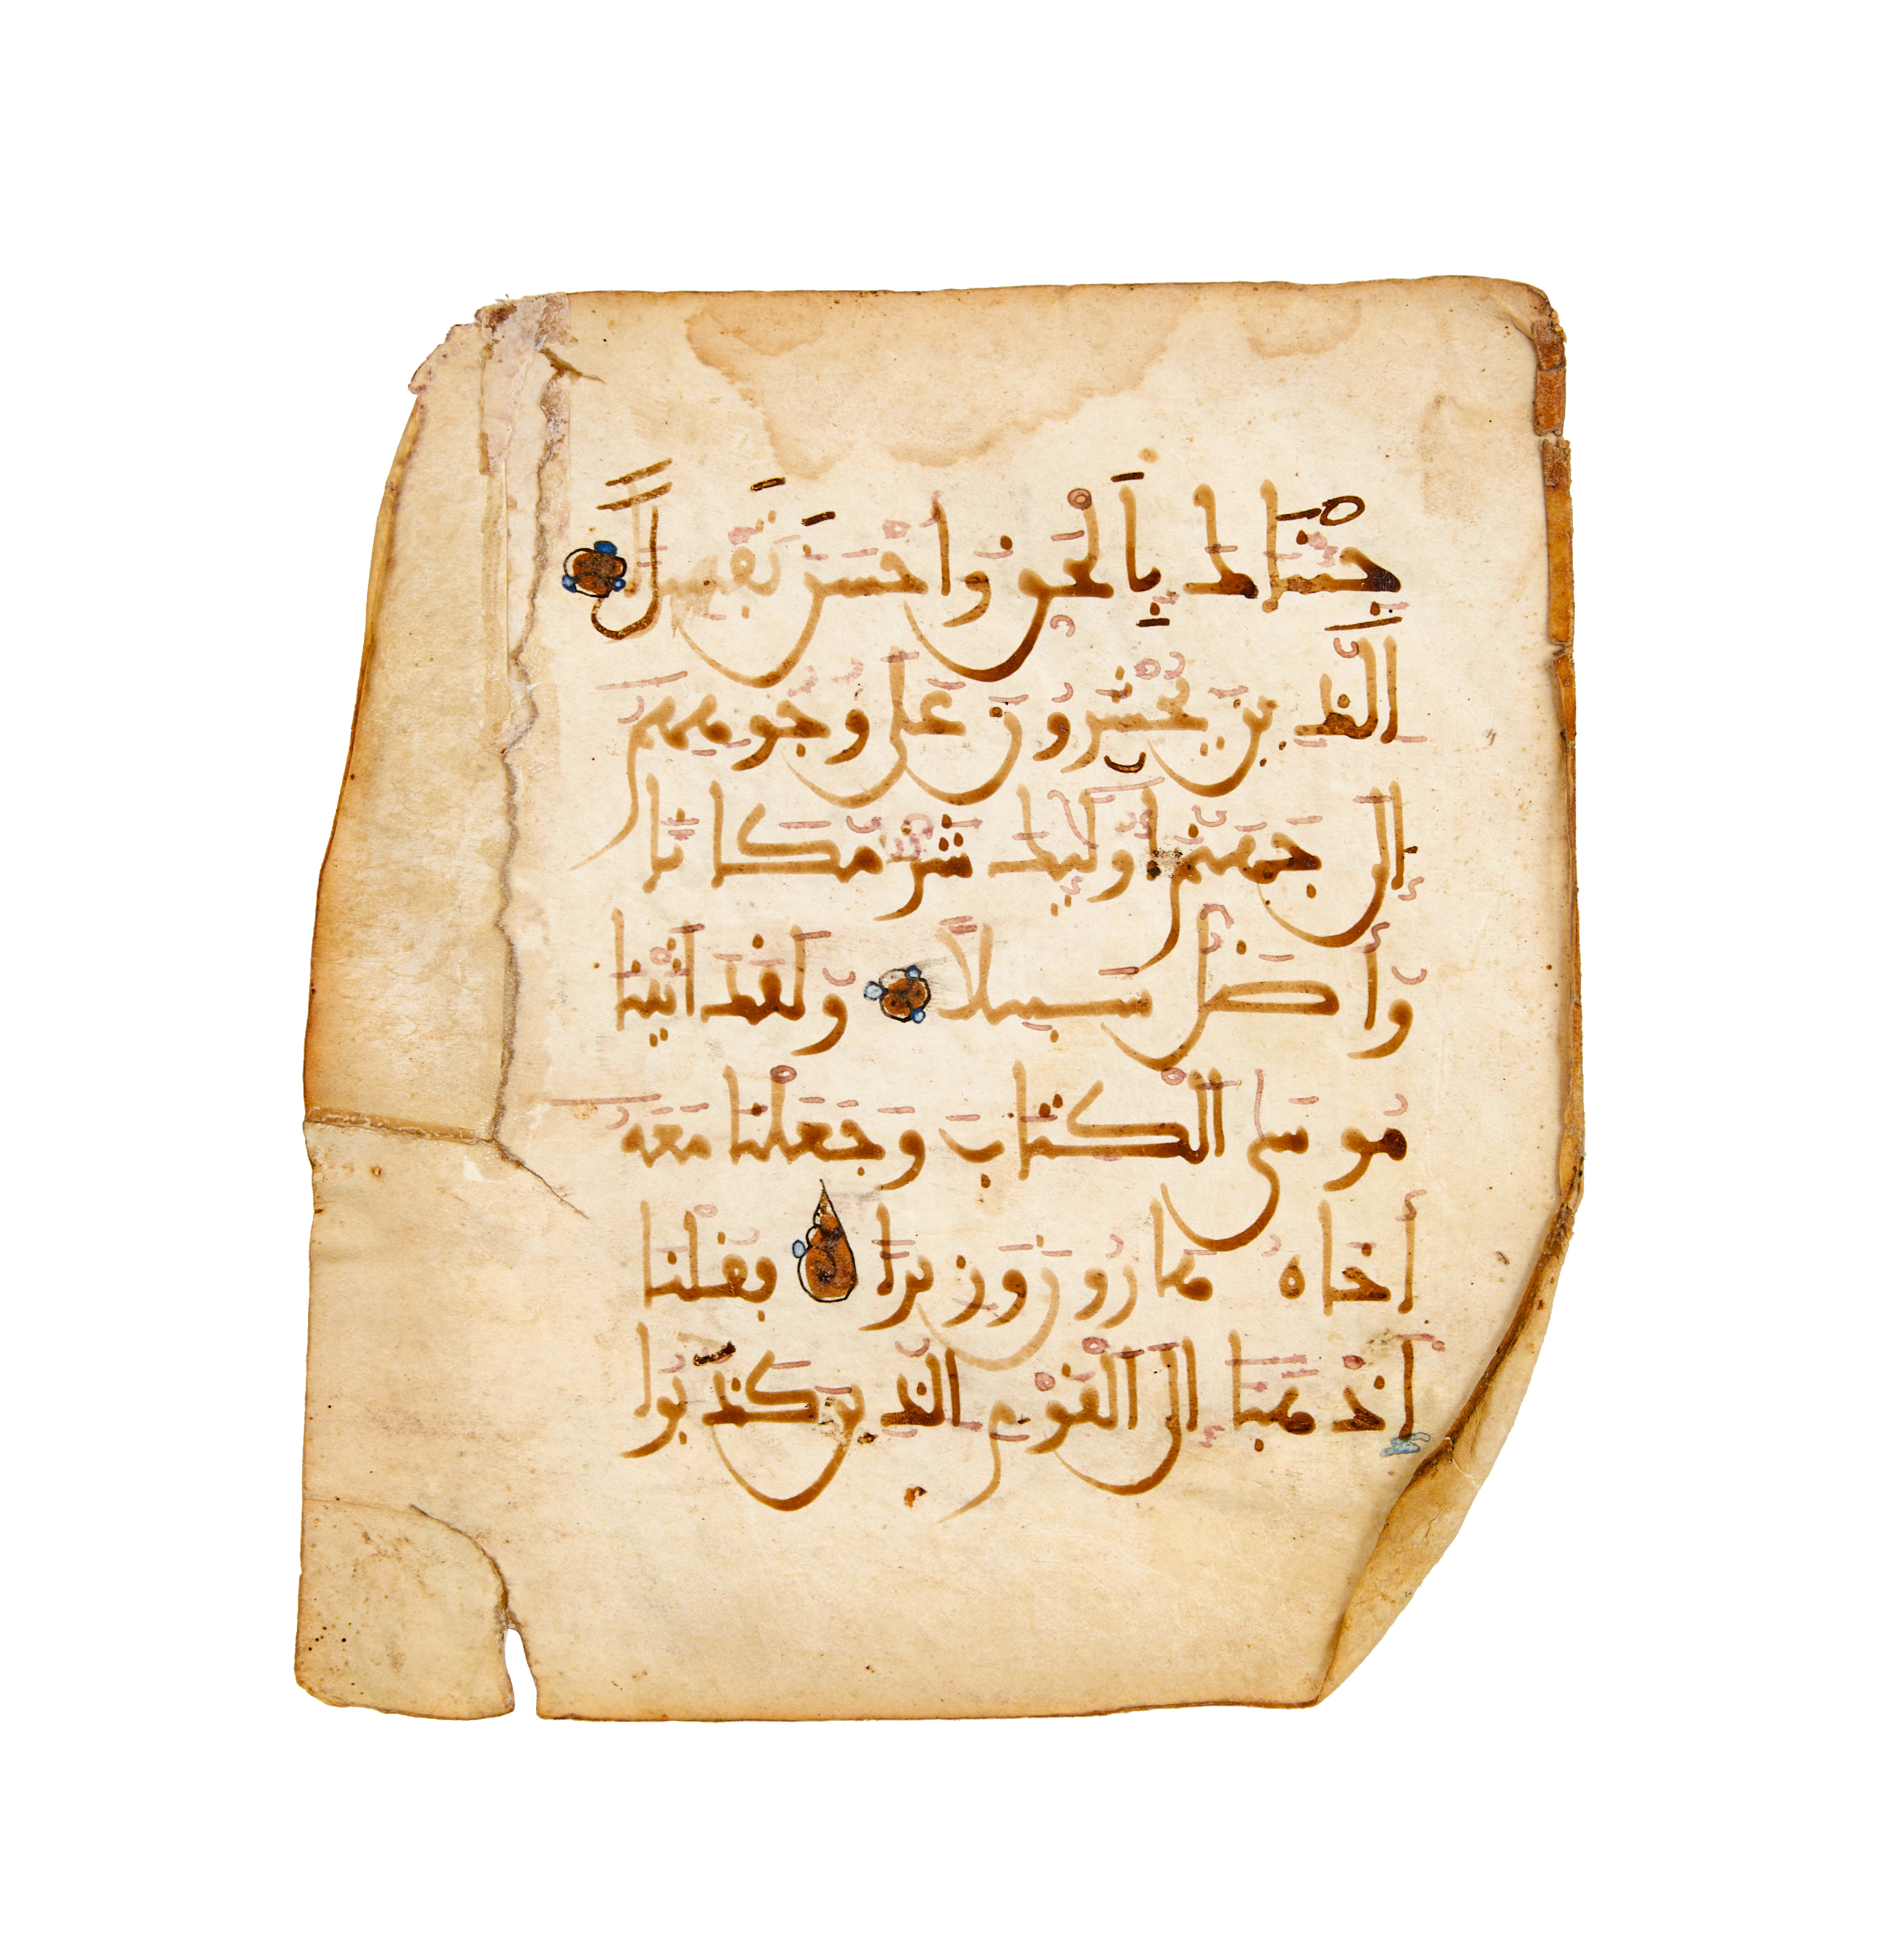 A MAGHRIBI QUR'AN FOLIO, NORTH AFRICA OR ANDALUSIA, 12TH OR 13TH CENTURY